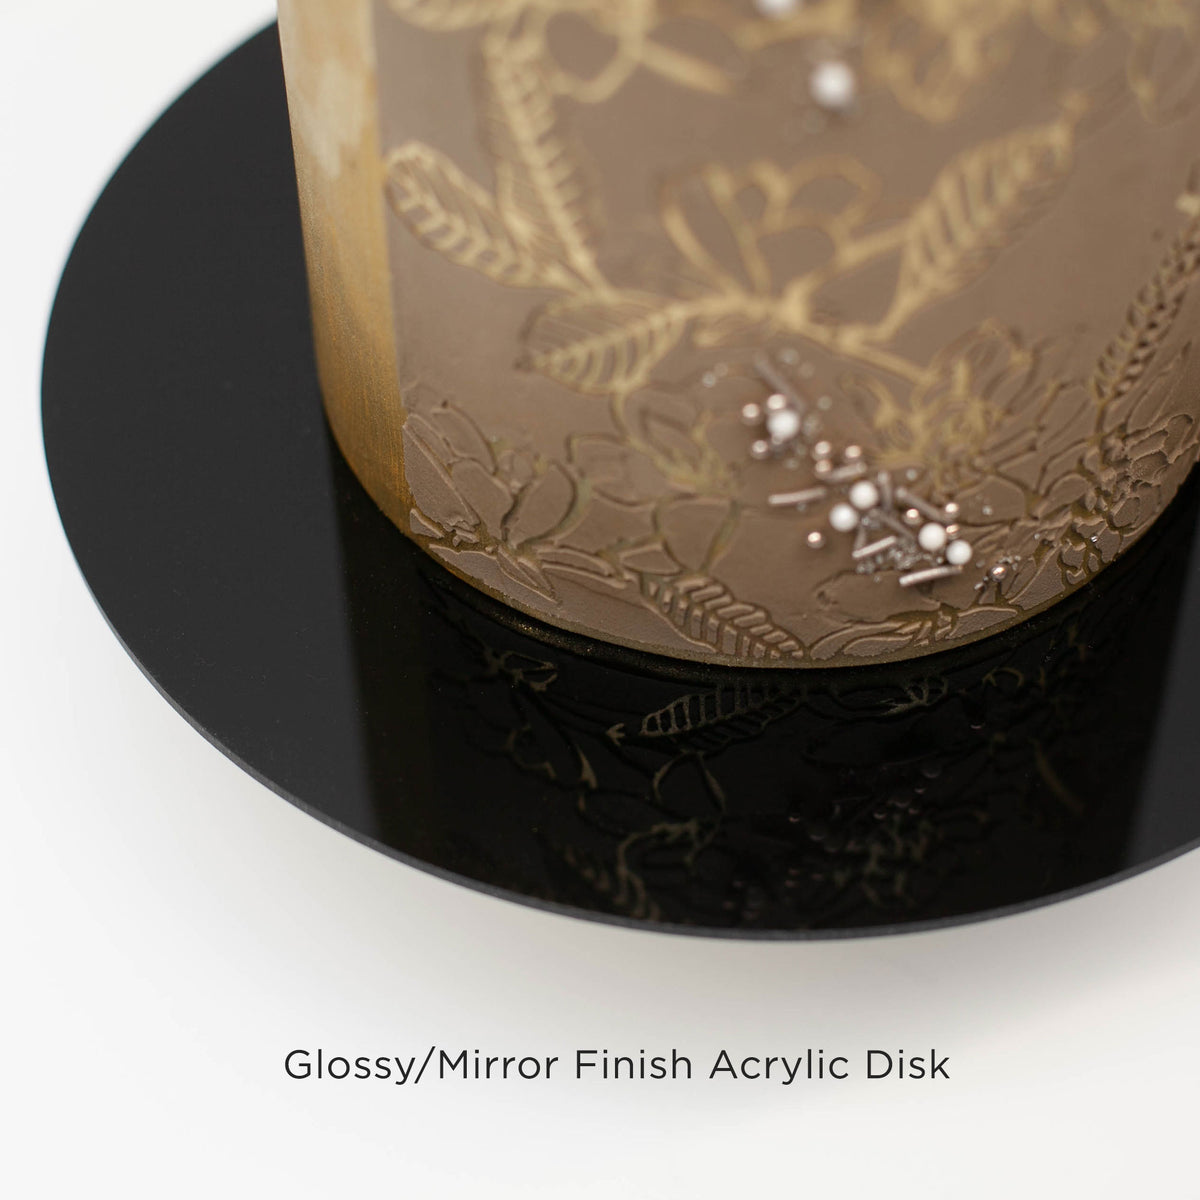 Black Glossy Acrylic Round Disk Set of 2-1/8 or 0.12 thick for